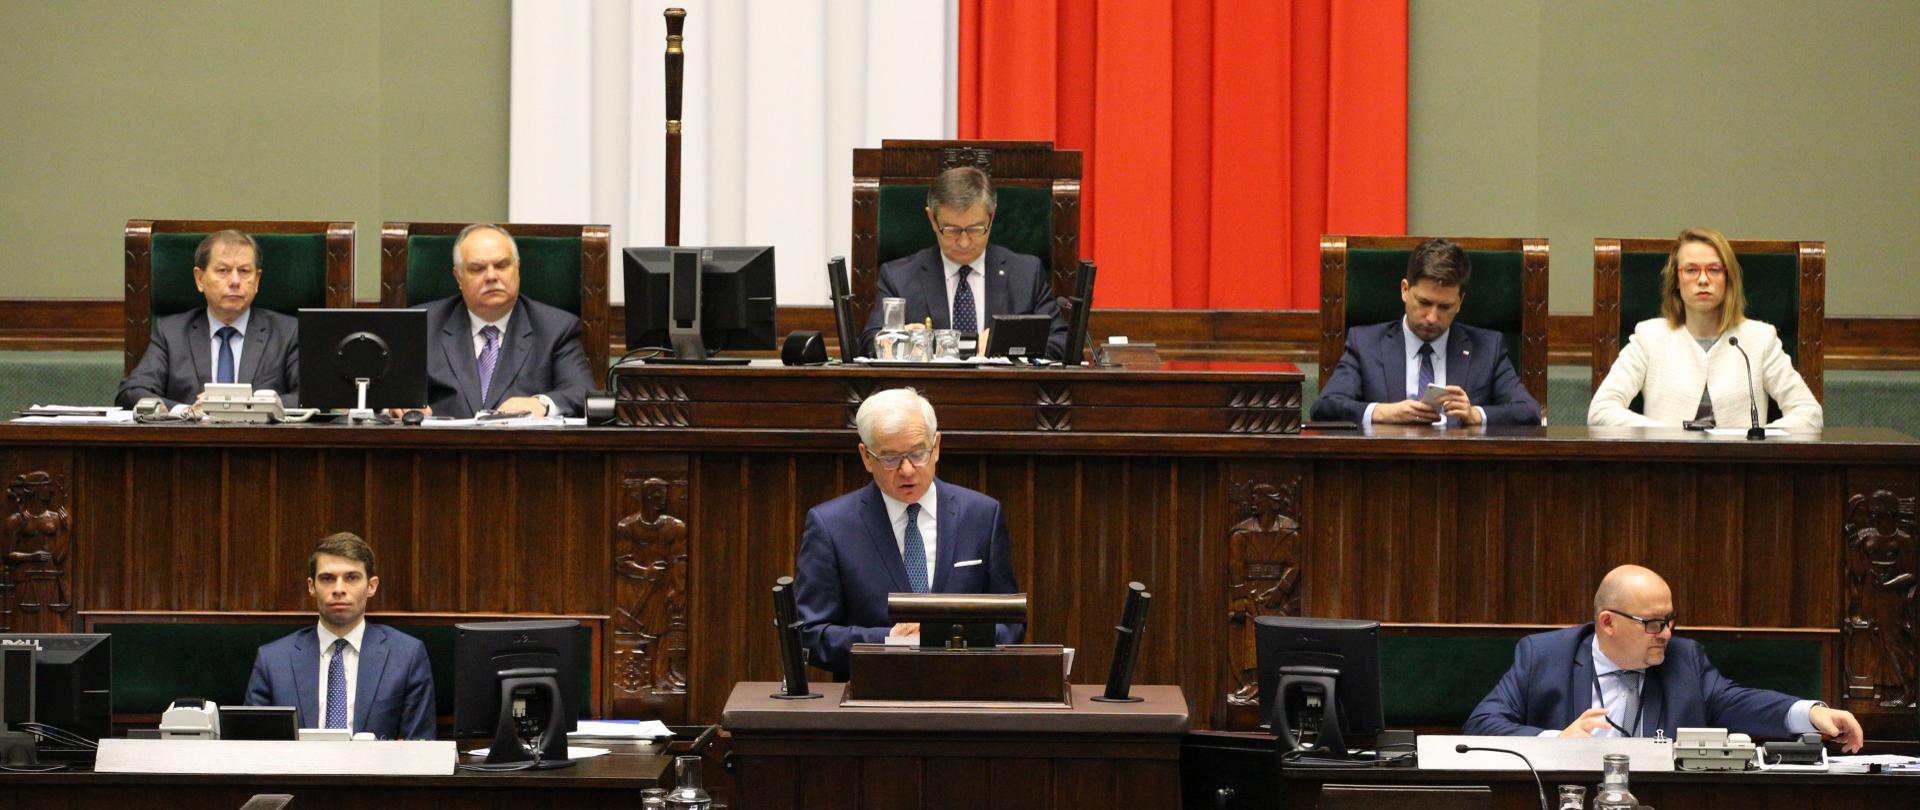 Annual speech of Foreign Minister Jacek Czaputowicz in Parliament 2019